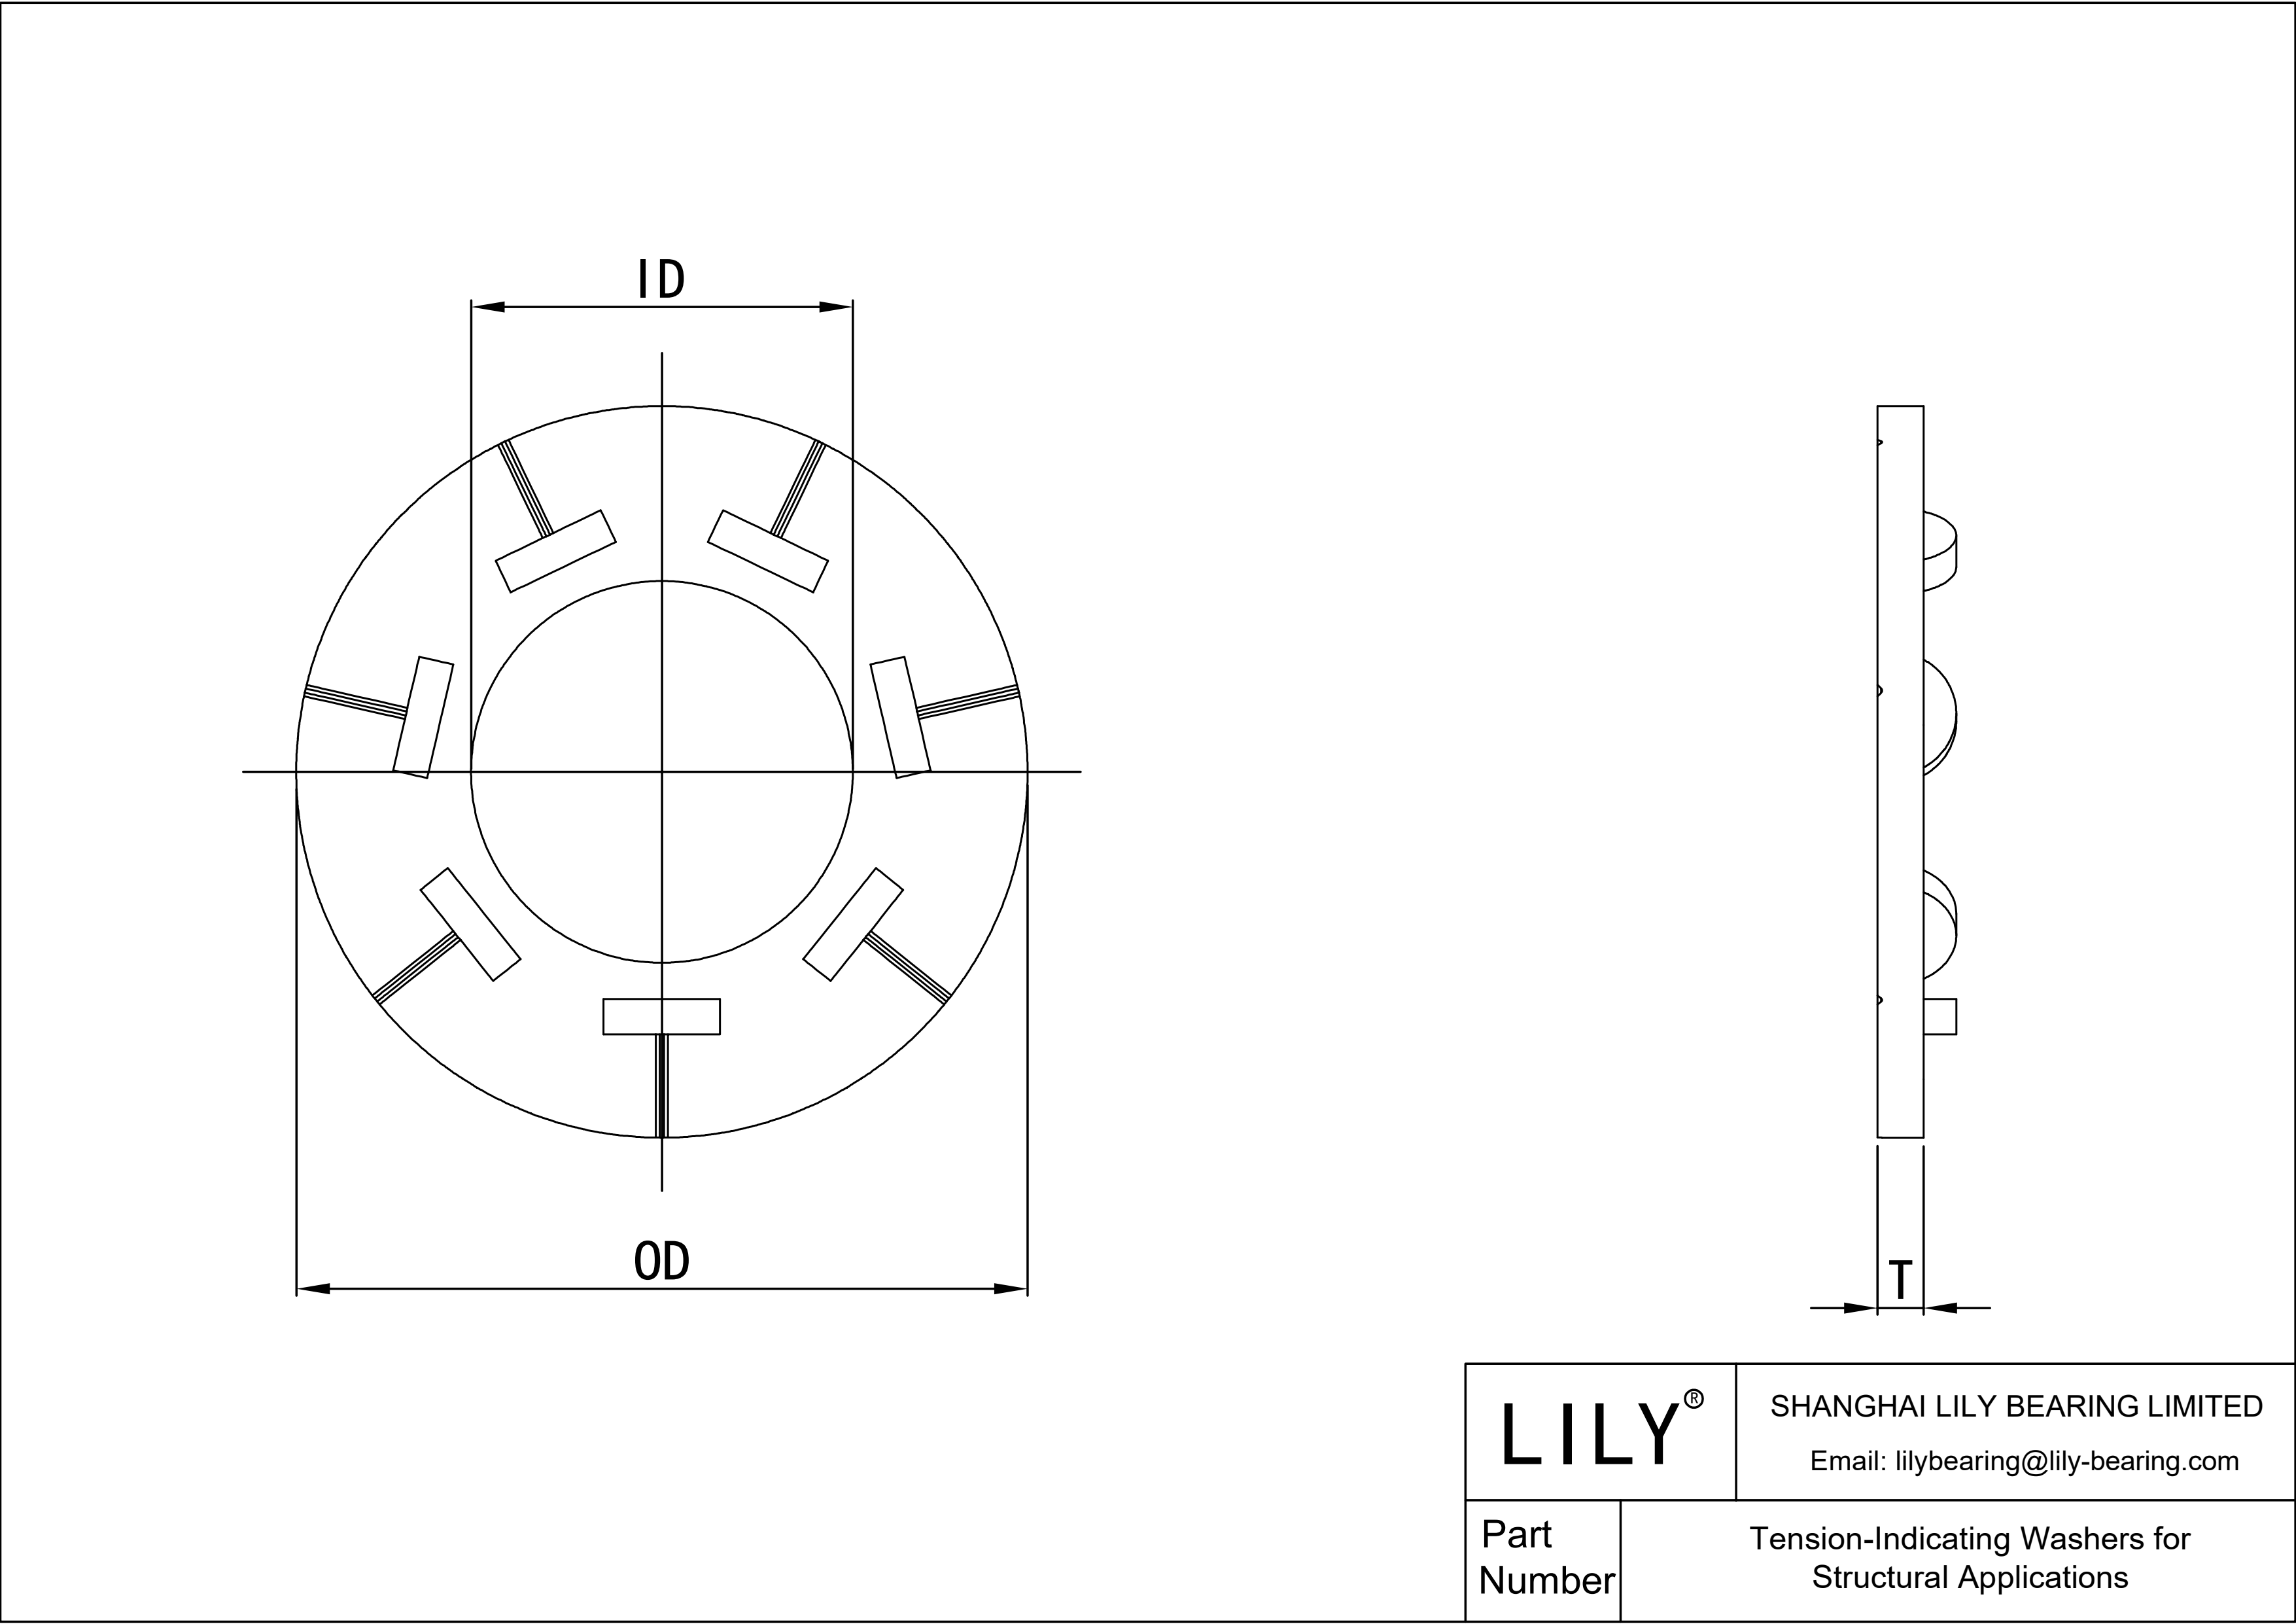 JBDFIAAAF Tension-Indicating Washers for Structural Applications cad drawing